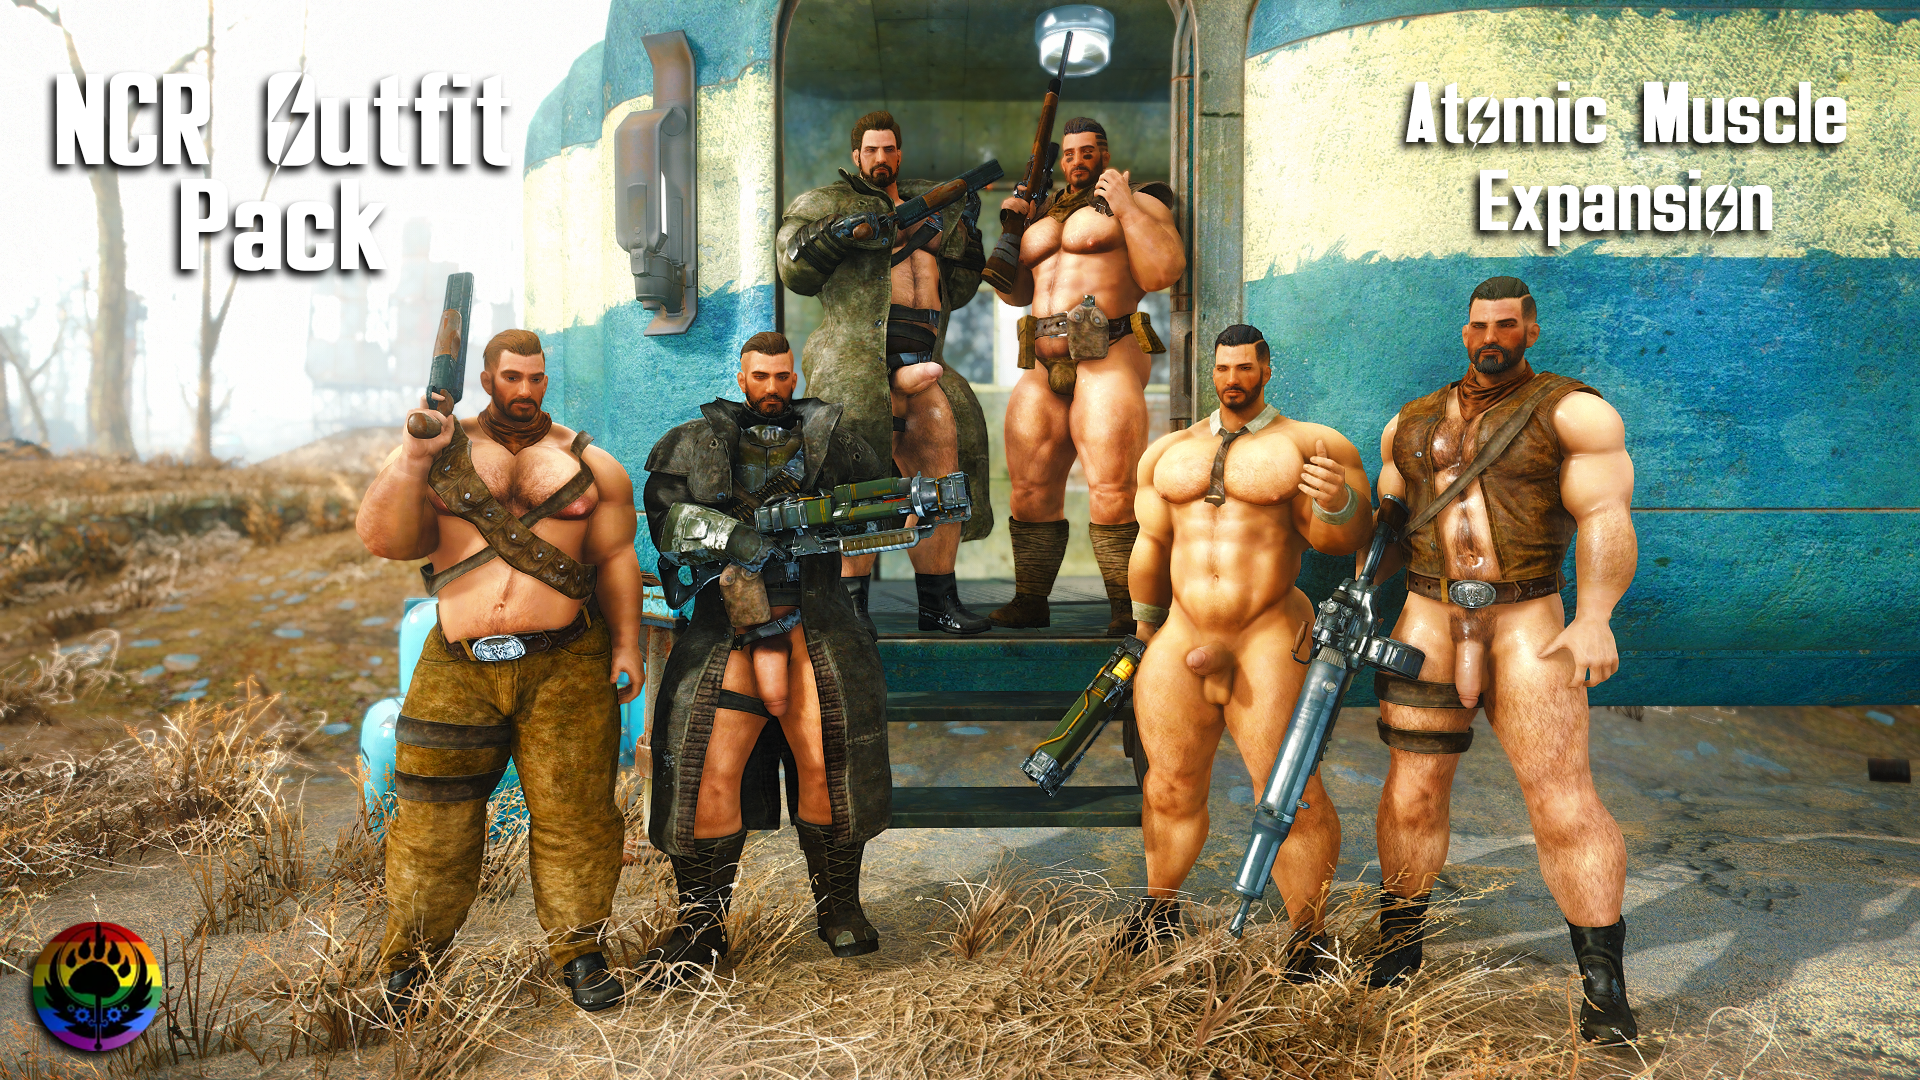 NCR Outfit Pack Atomic Muscle Expansion and Outfits Distribution